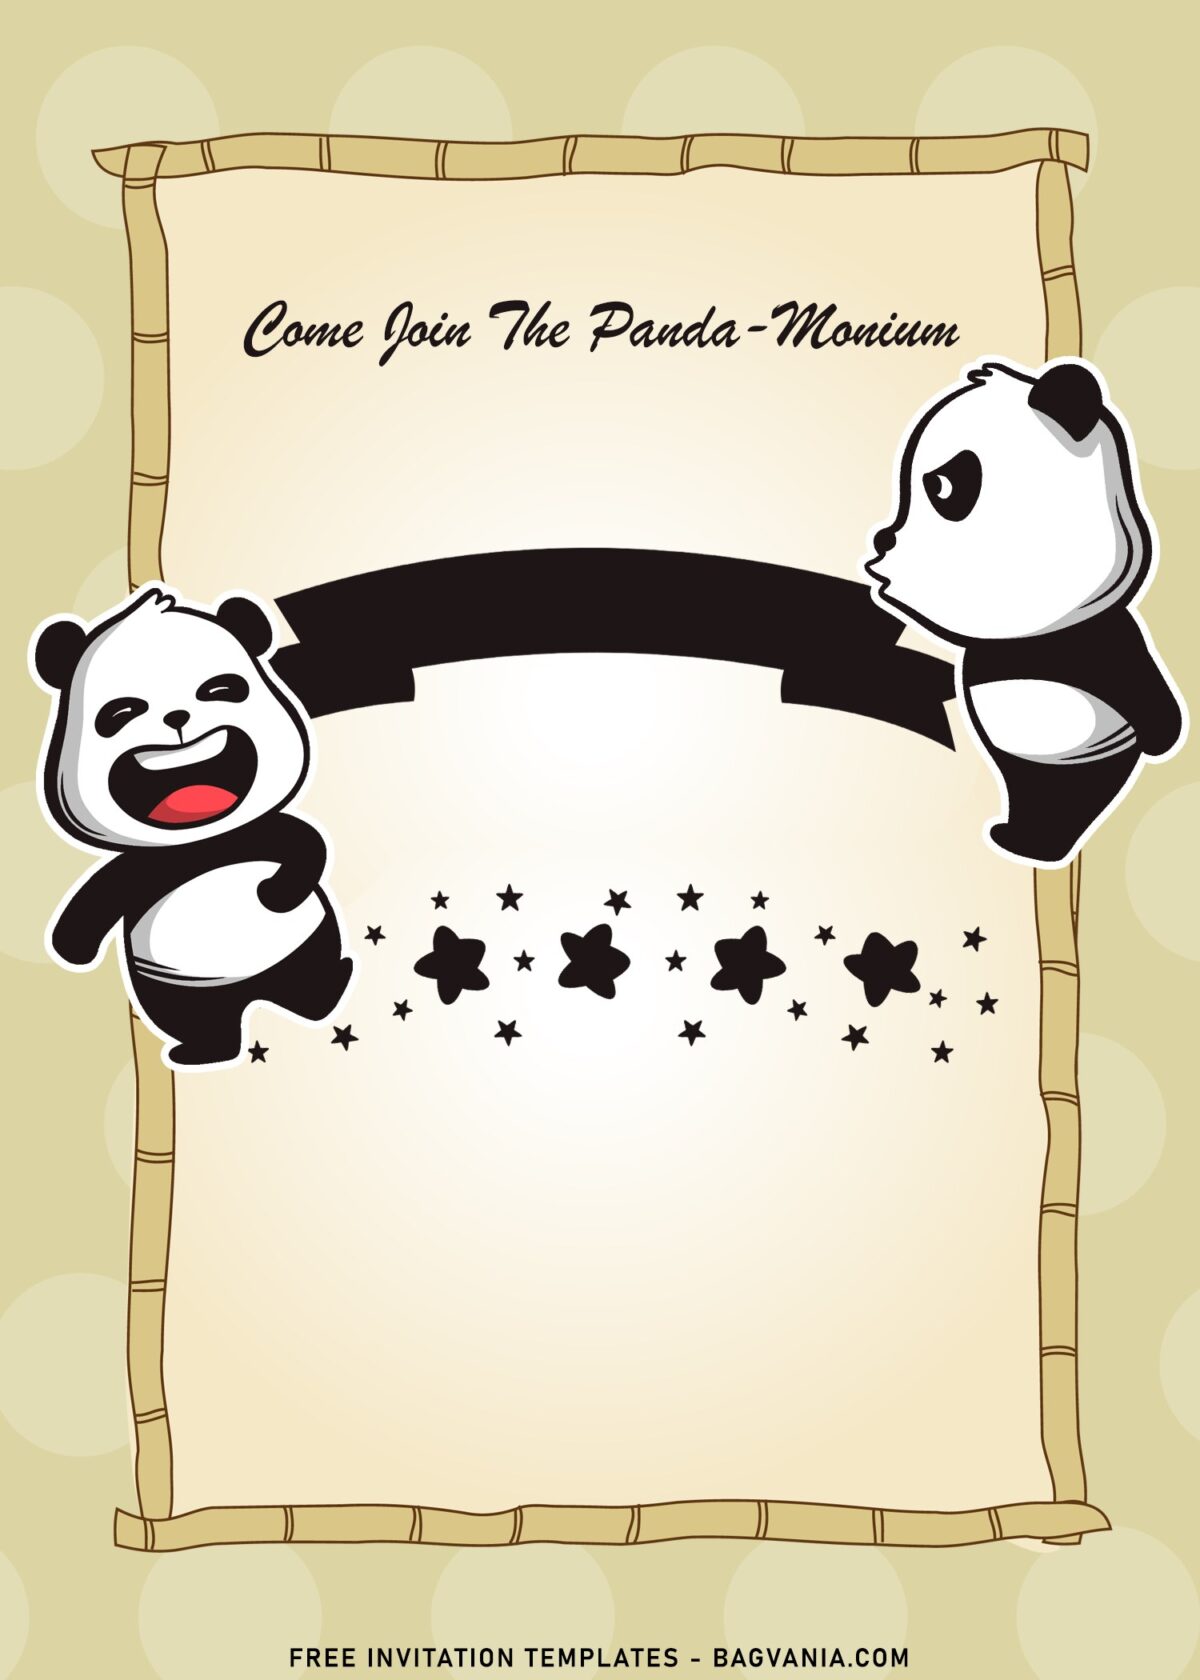 9+ Funny Panda Birthday Invitation Templates For Your Kid's Birthday with cute polka dot background